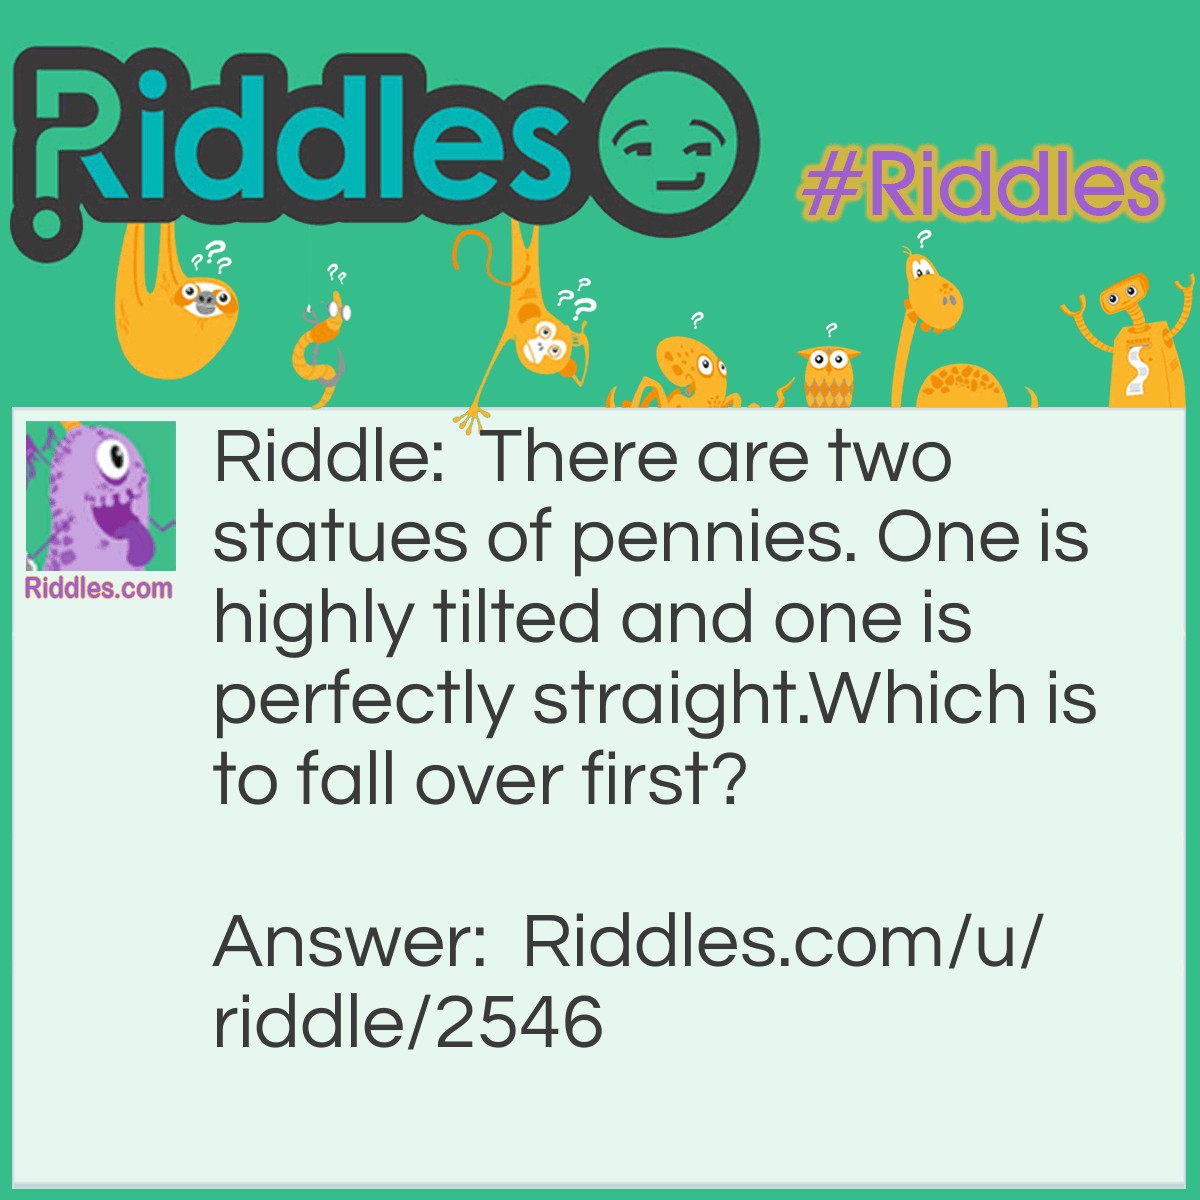 Riddle: There are two statues of pennies. One is highly tilted and one is perfectly straight.Which is to fall over first? Answer: They're both gonna stay up because they're statues.